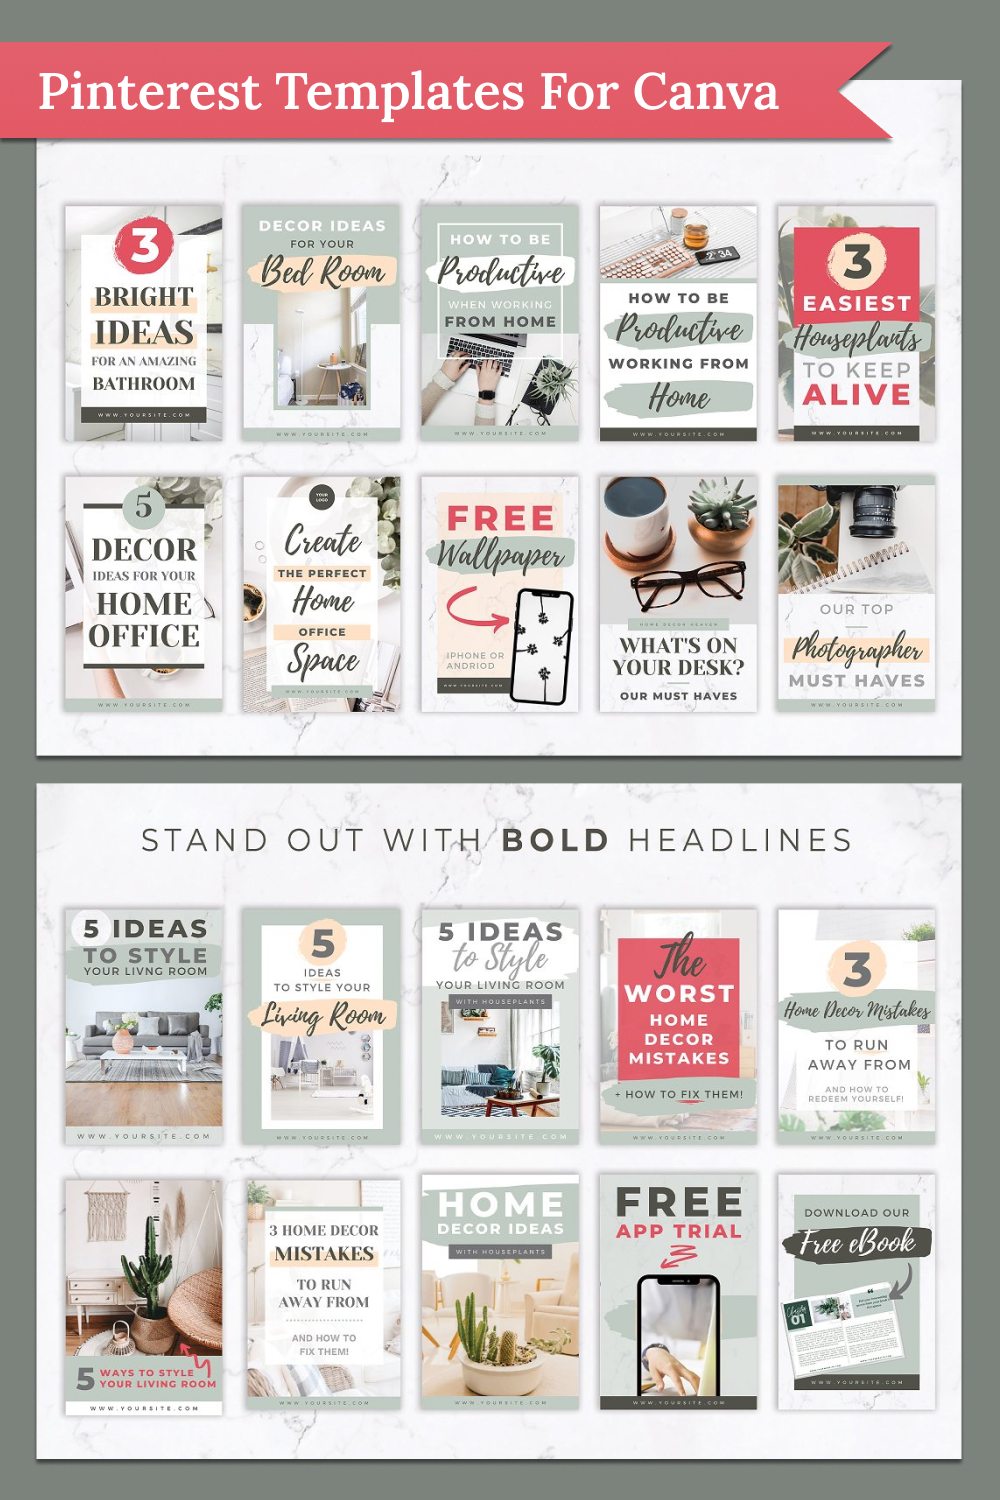 Pinterest of templates for canva.